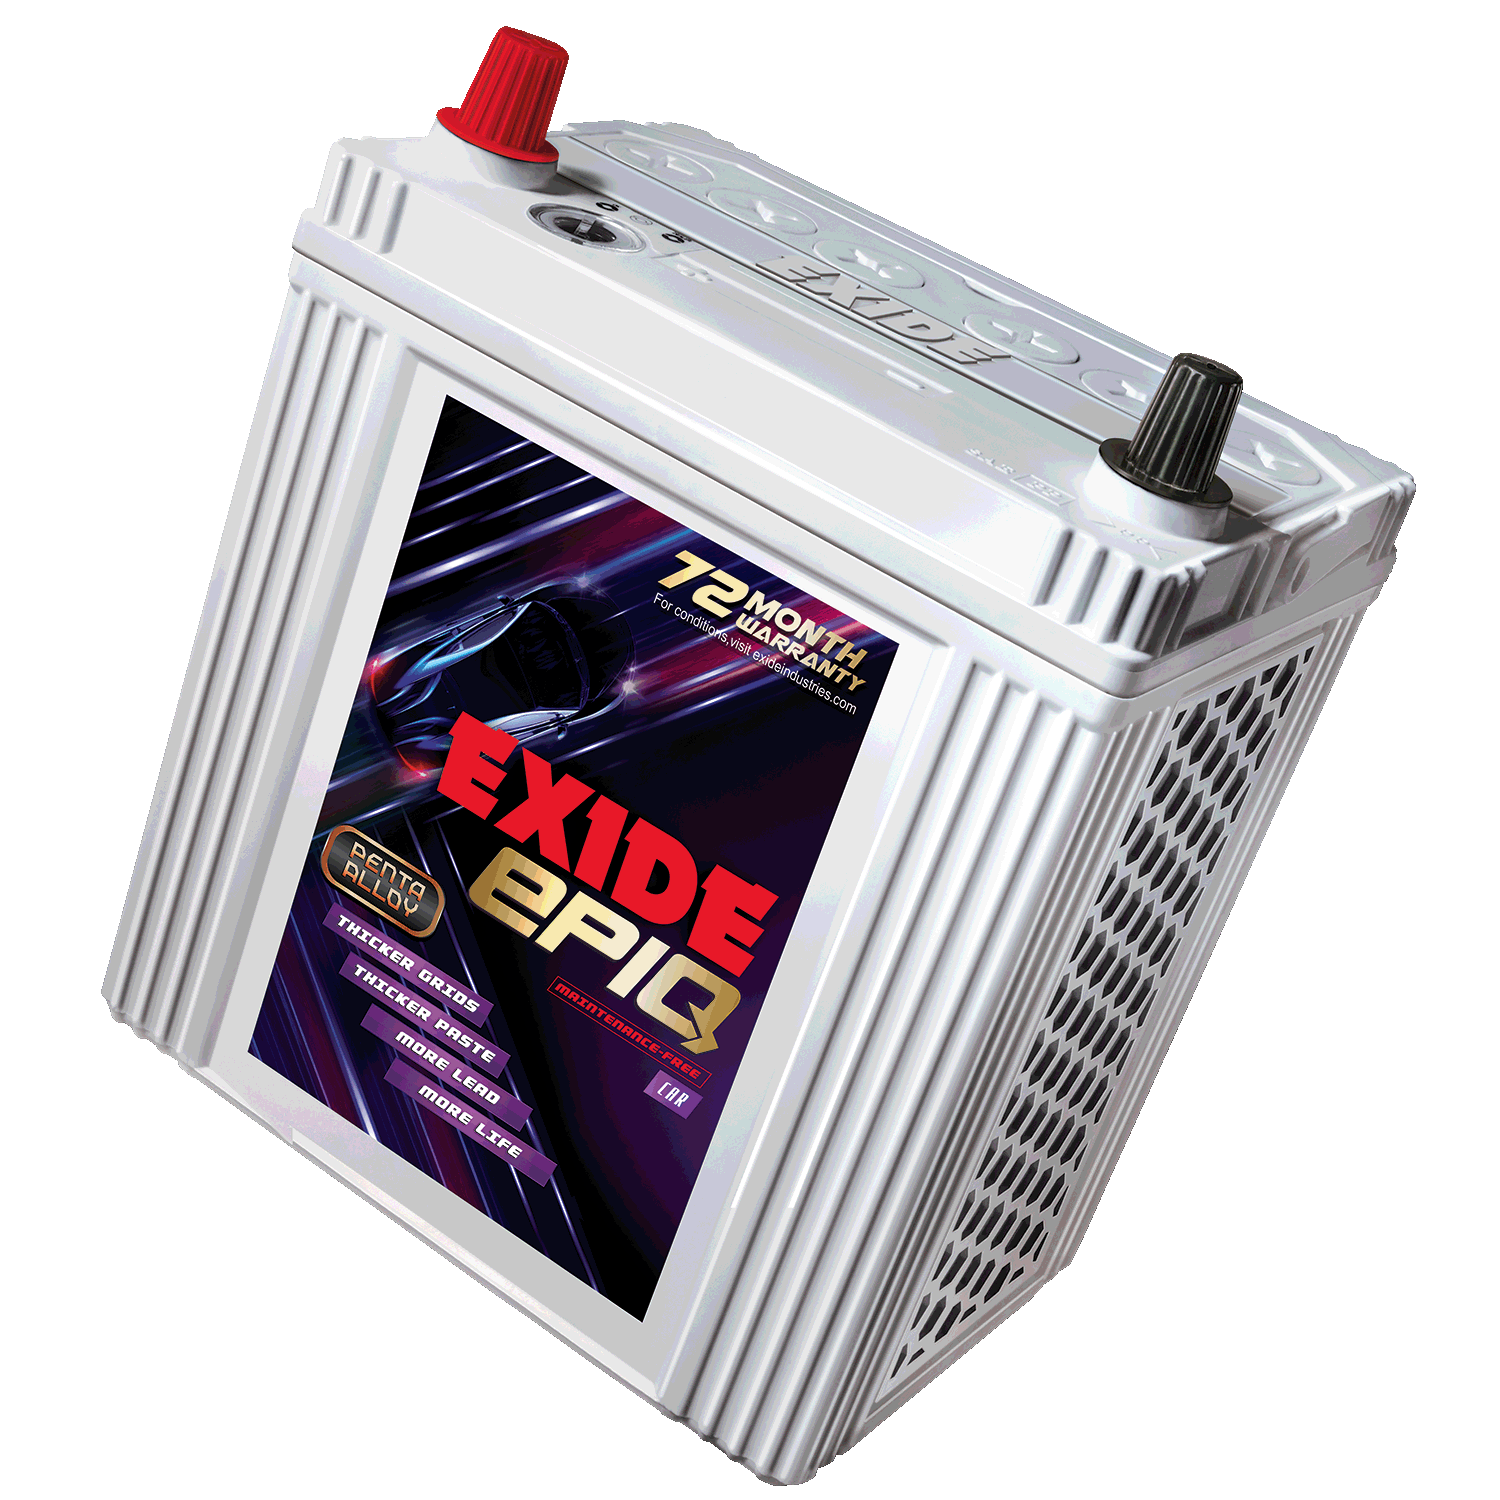 Exide launches Epiq battery with 6-year warranty - Team-BHP